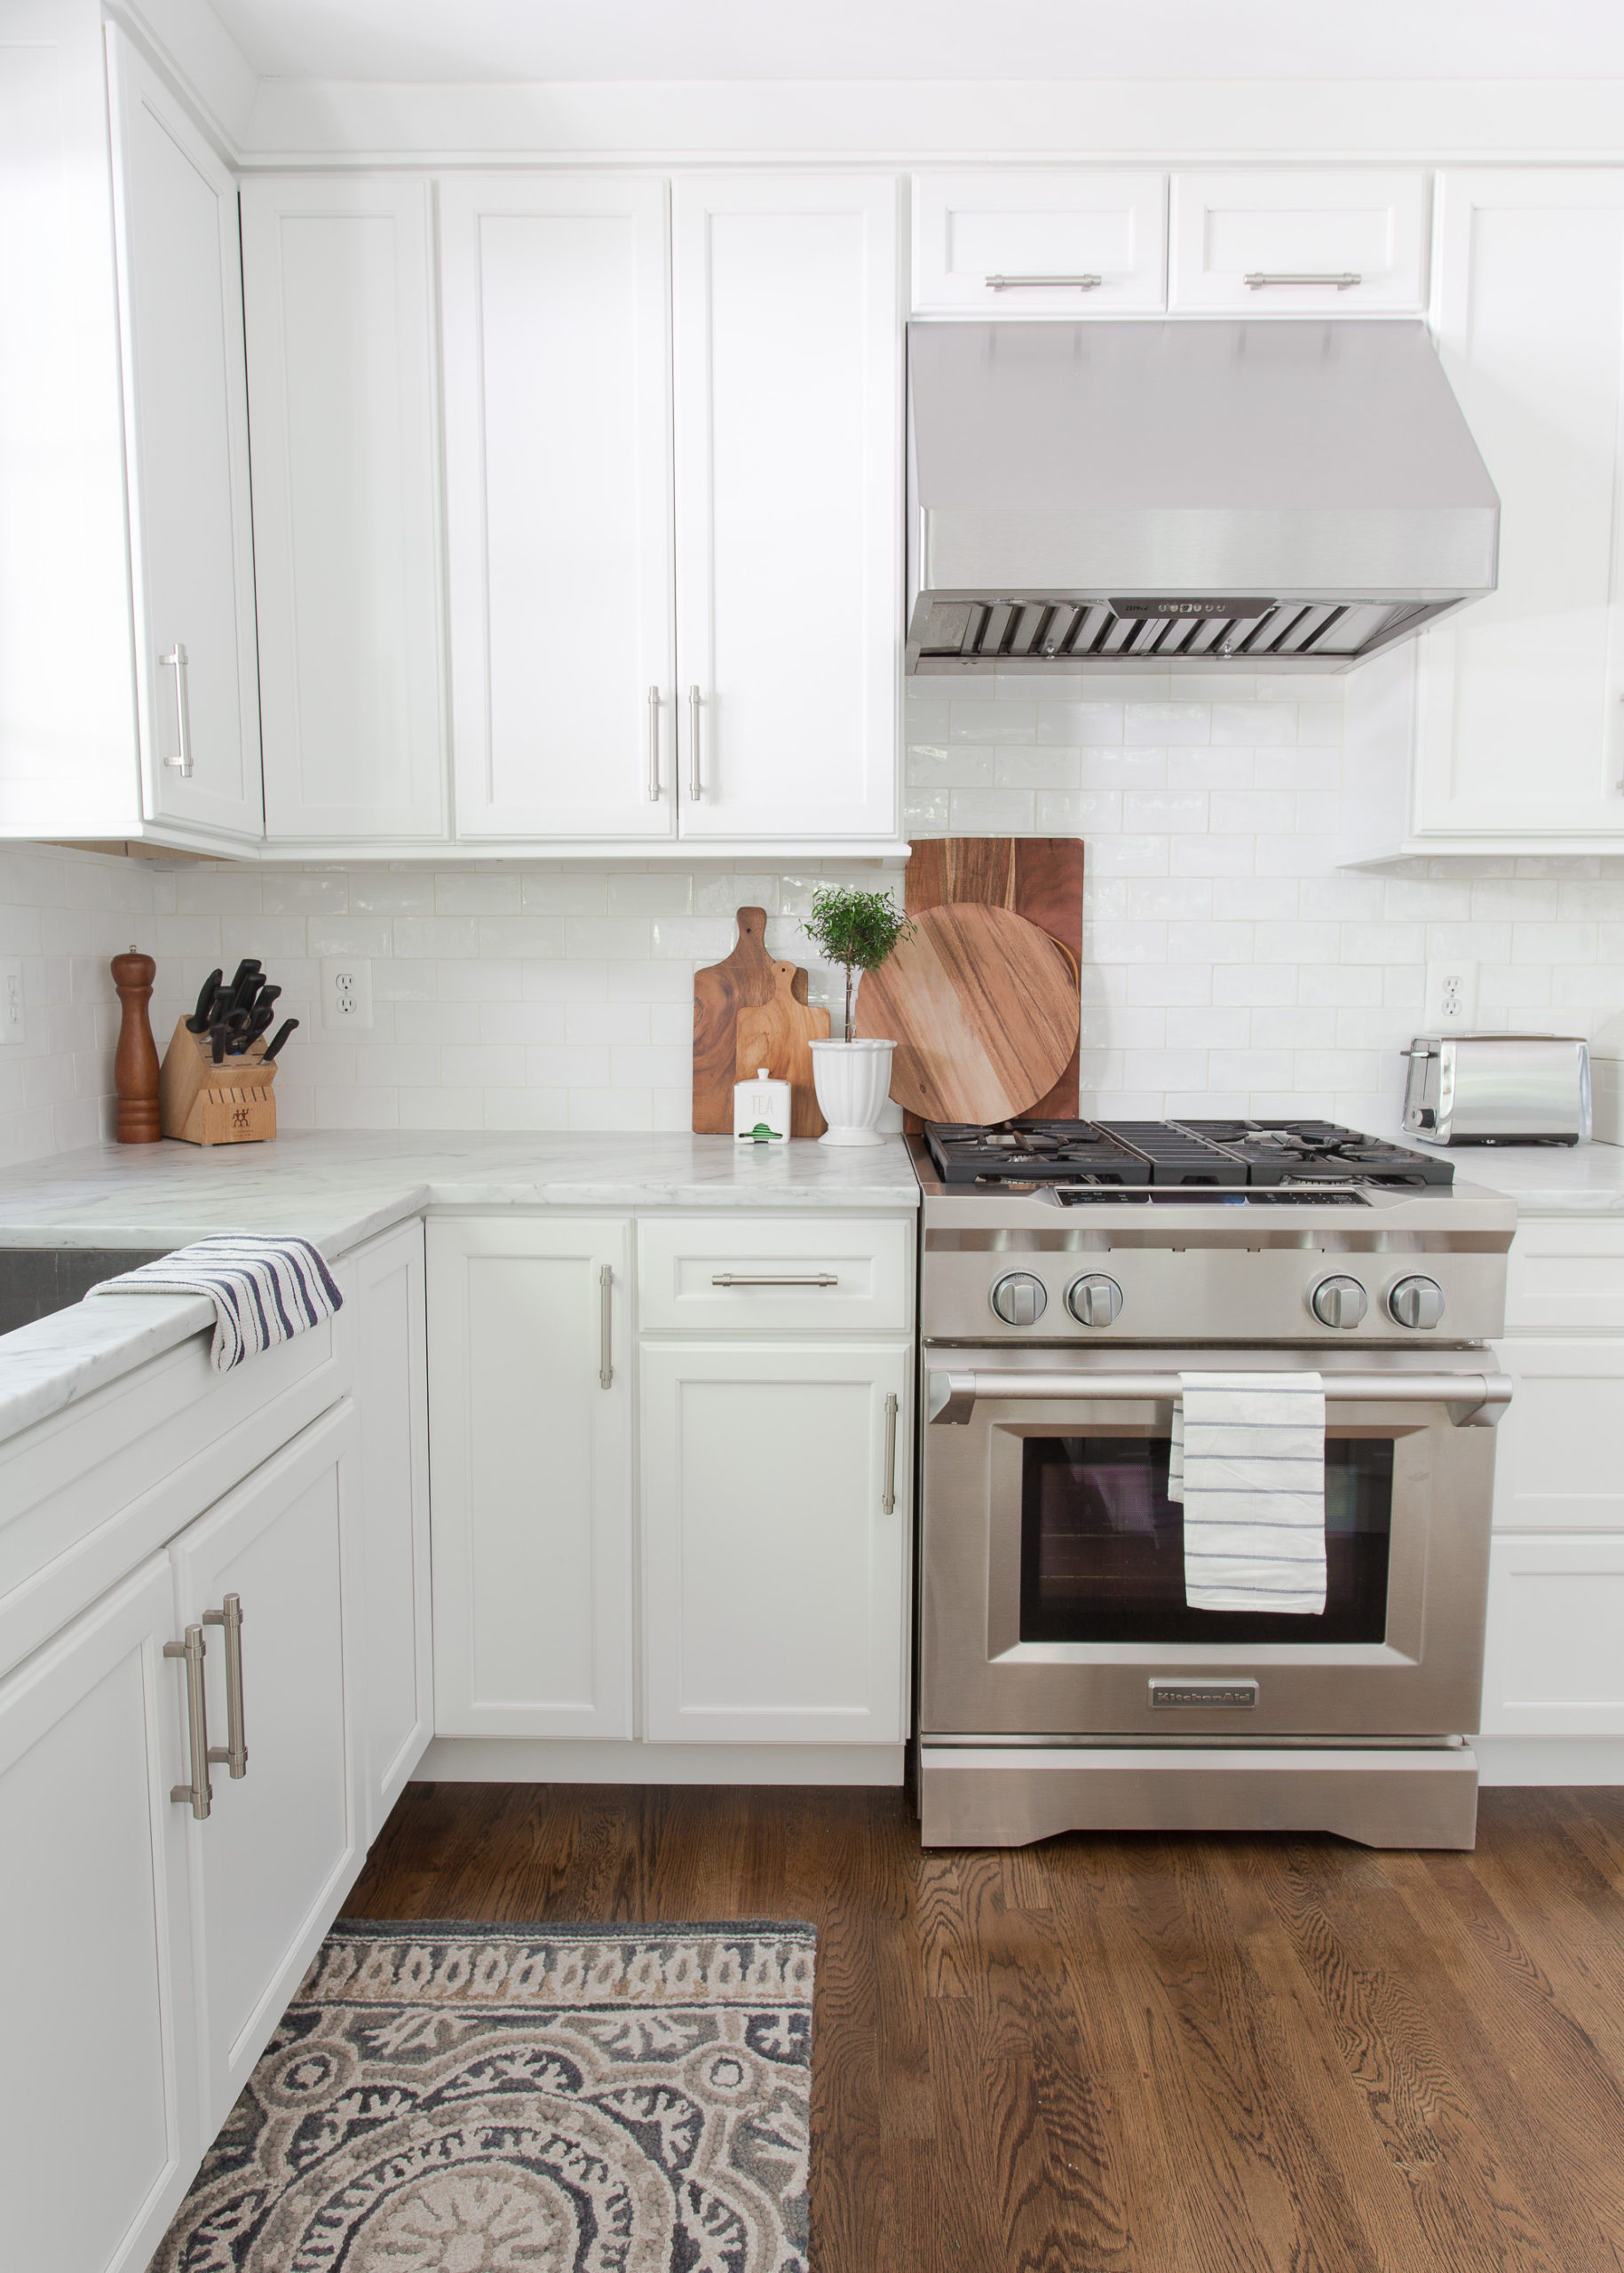 White kitchen with wood floors, stainless steel range